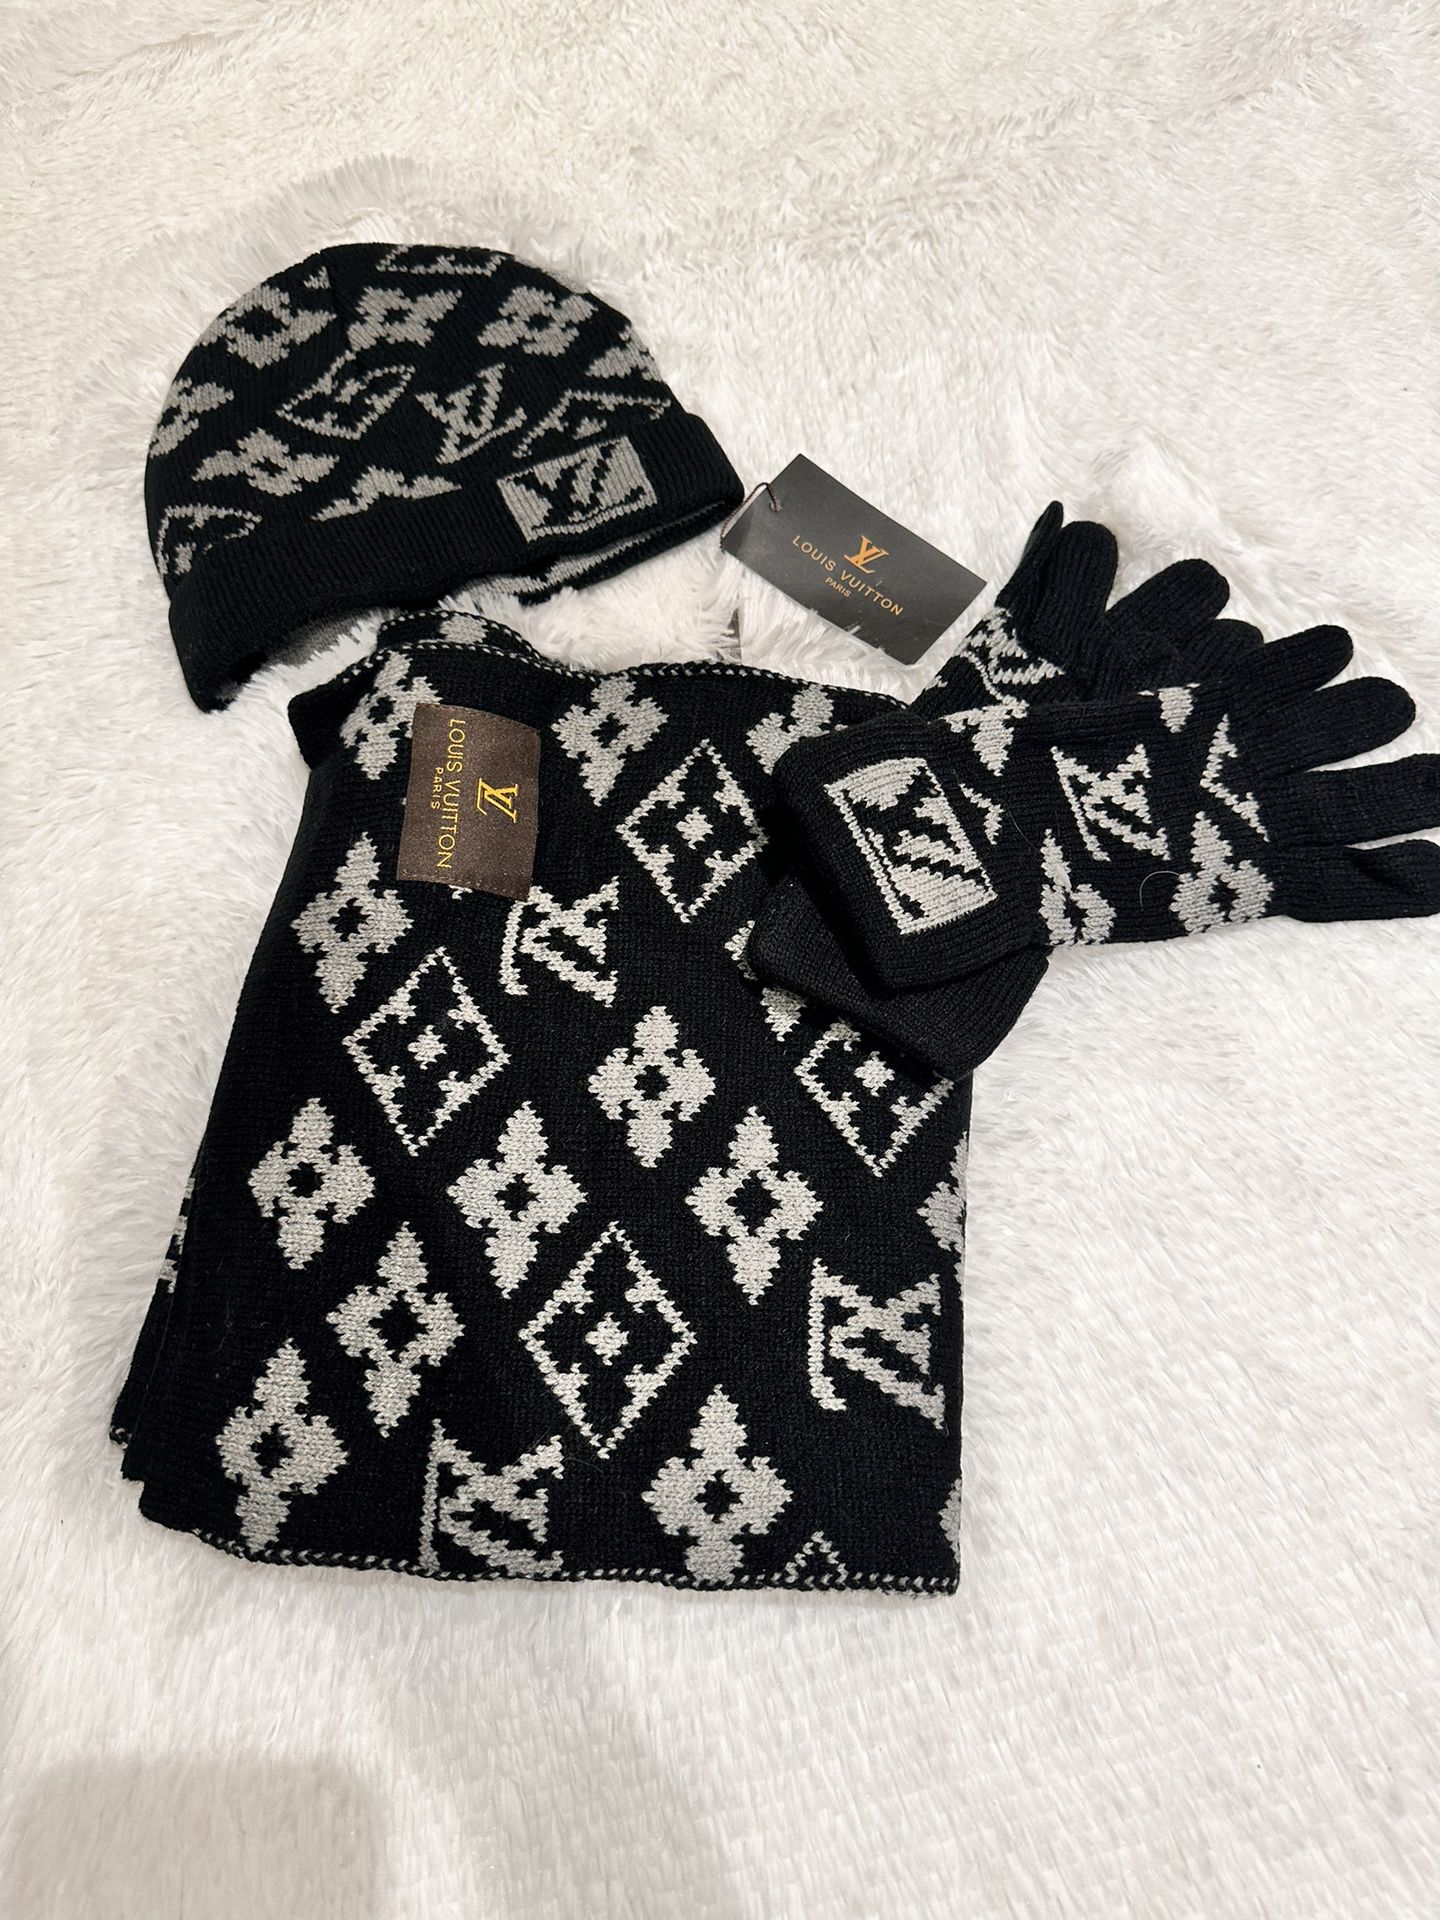 louis vuitton hat and scarf drip｜TikTok Search